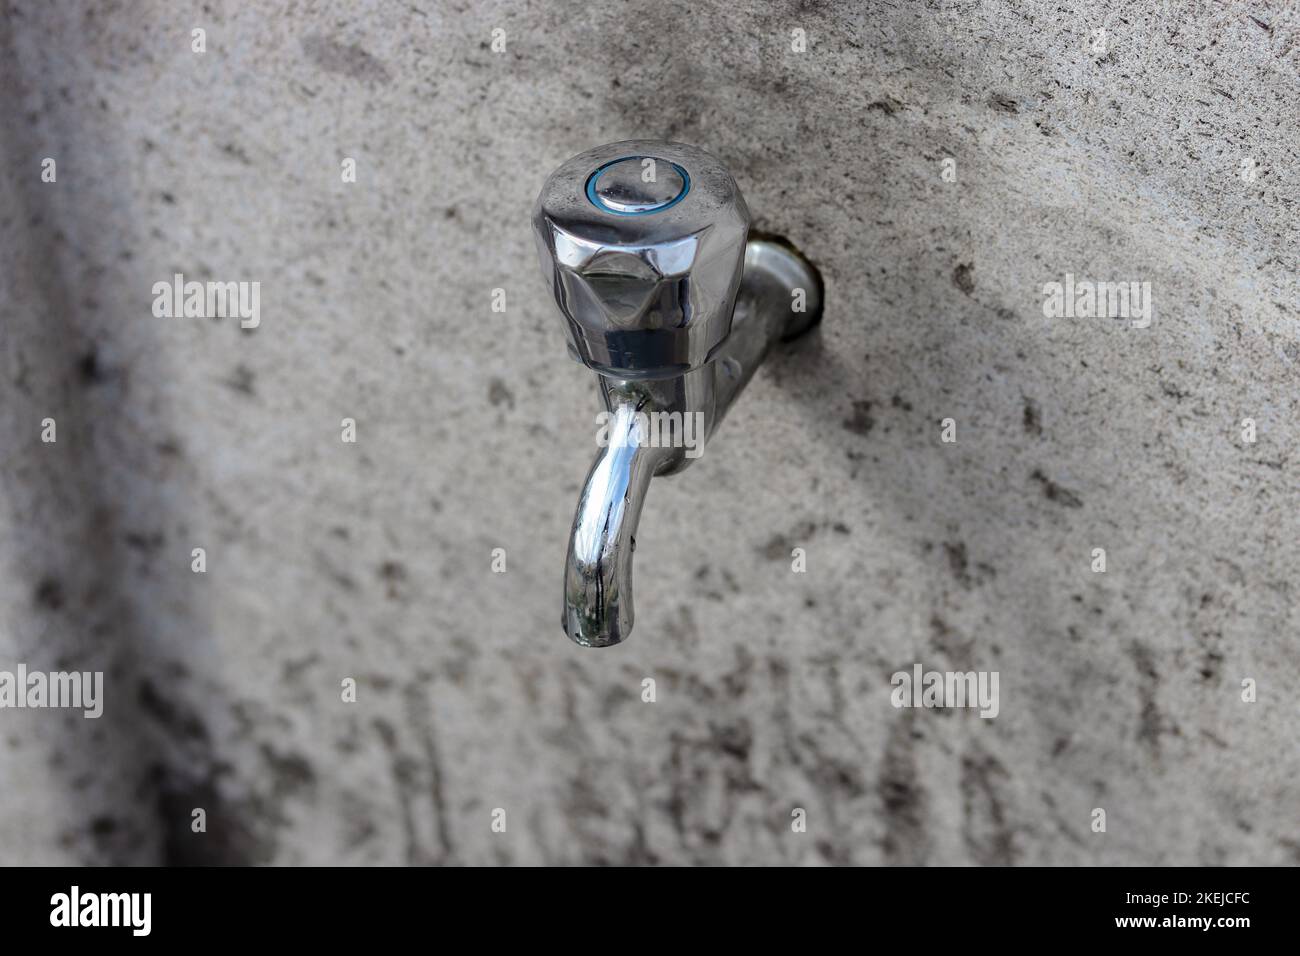 Faucet mounted on a stone wall. Top view of the faucet. Stock Photo